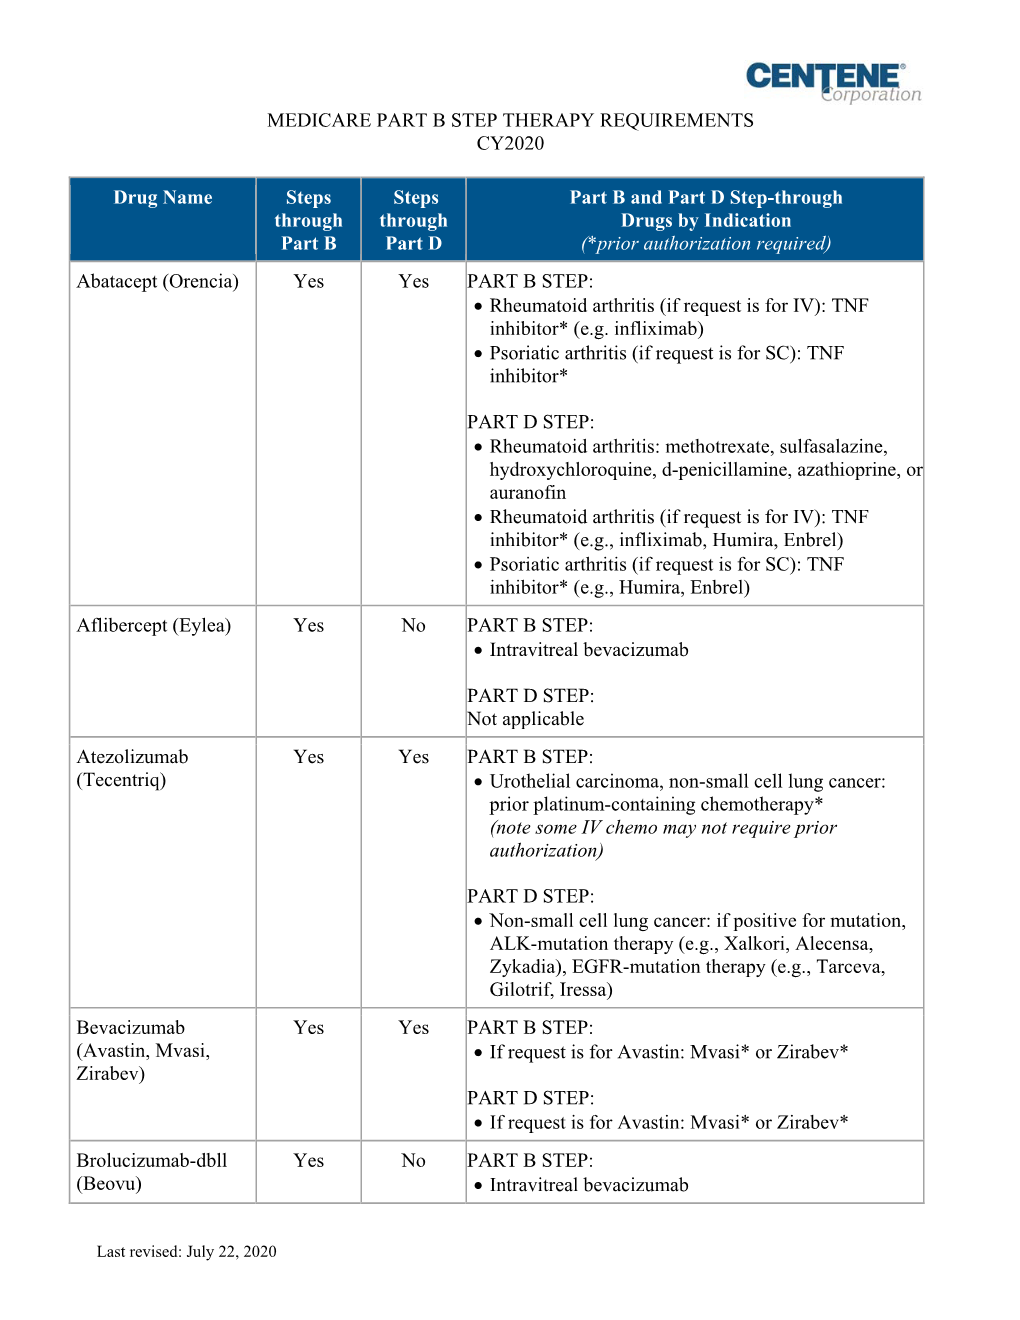 Medicare Part B Step Therapy Summary Table